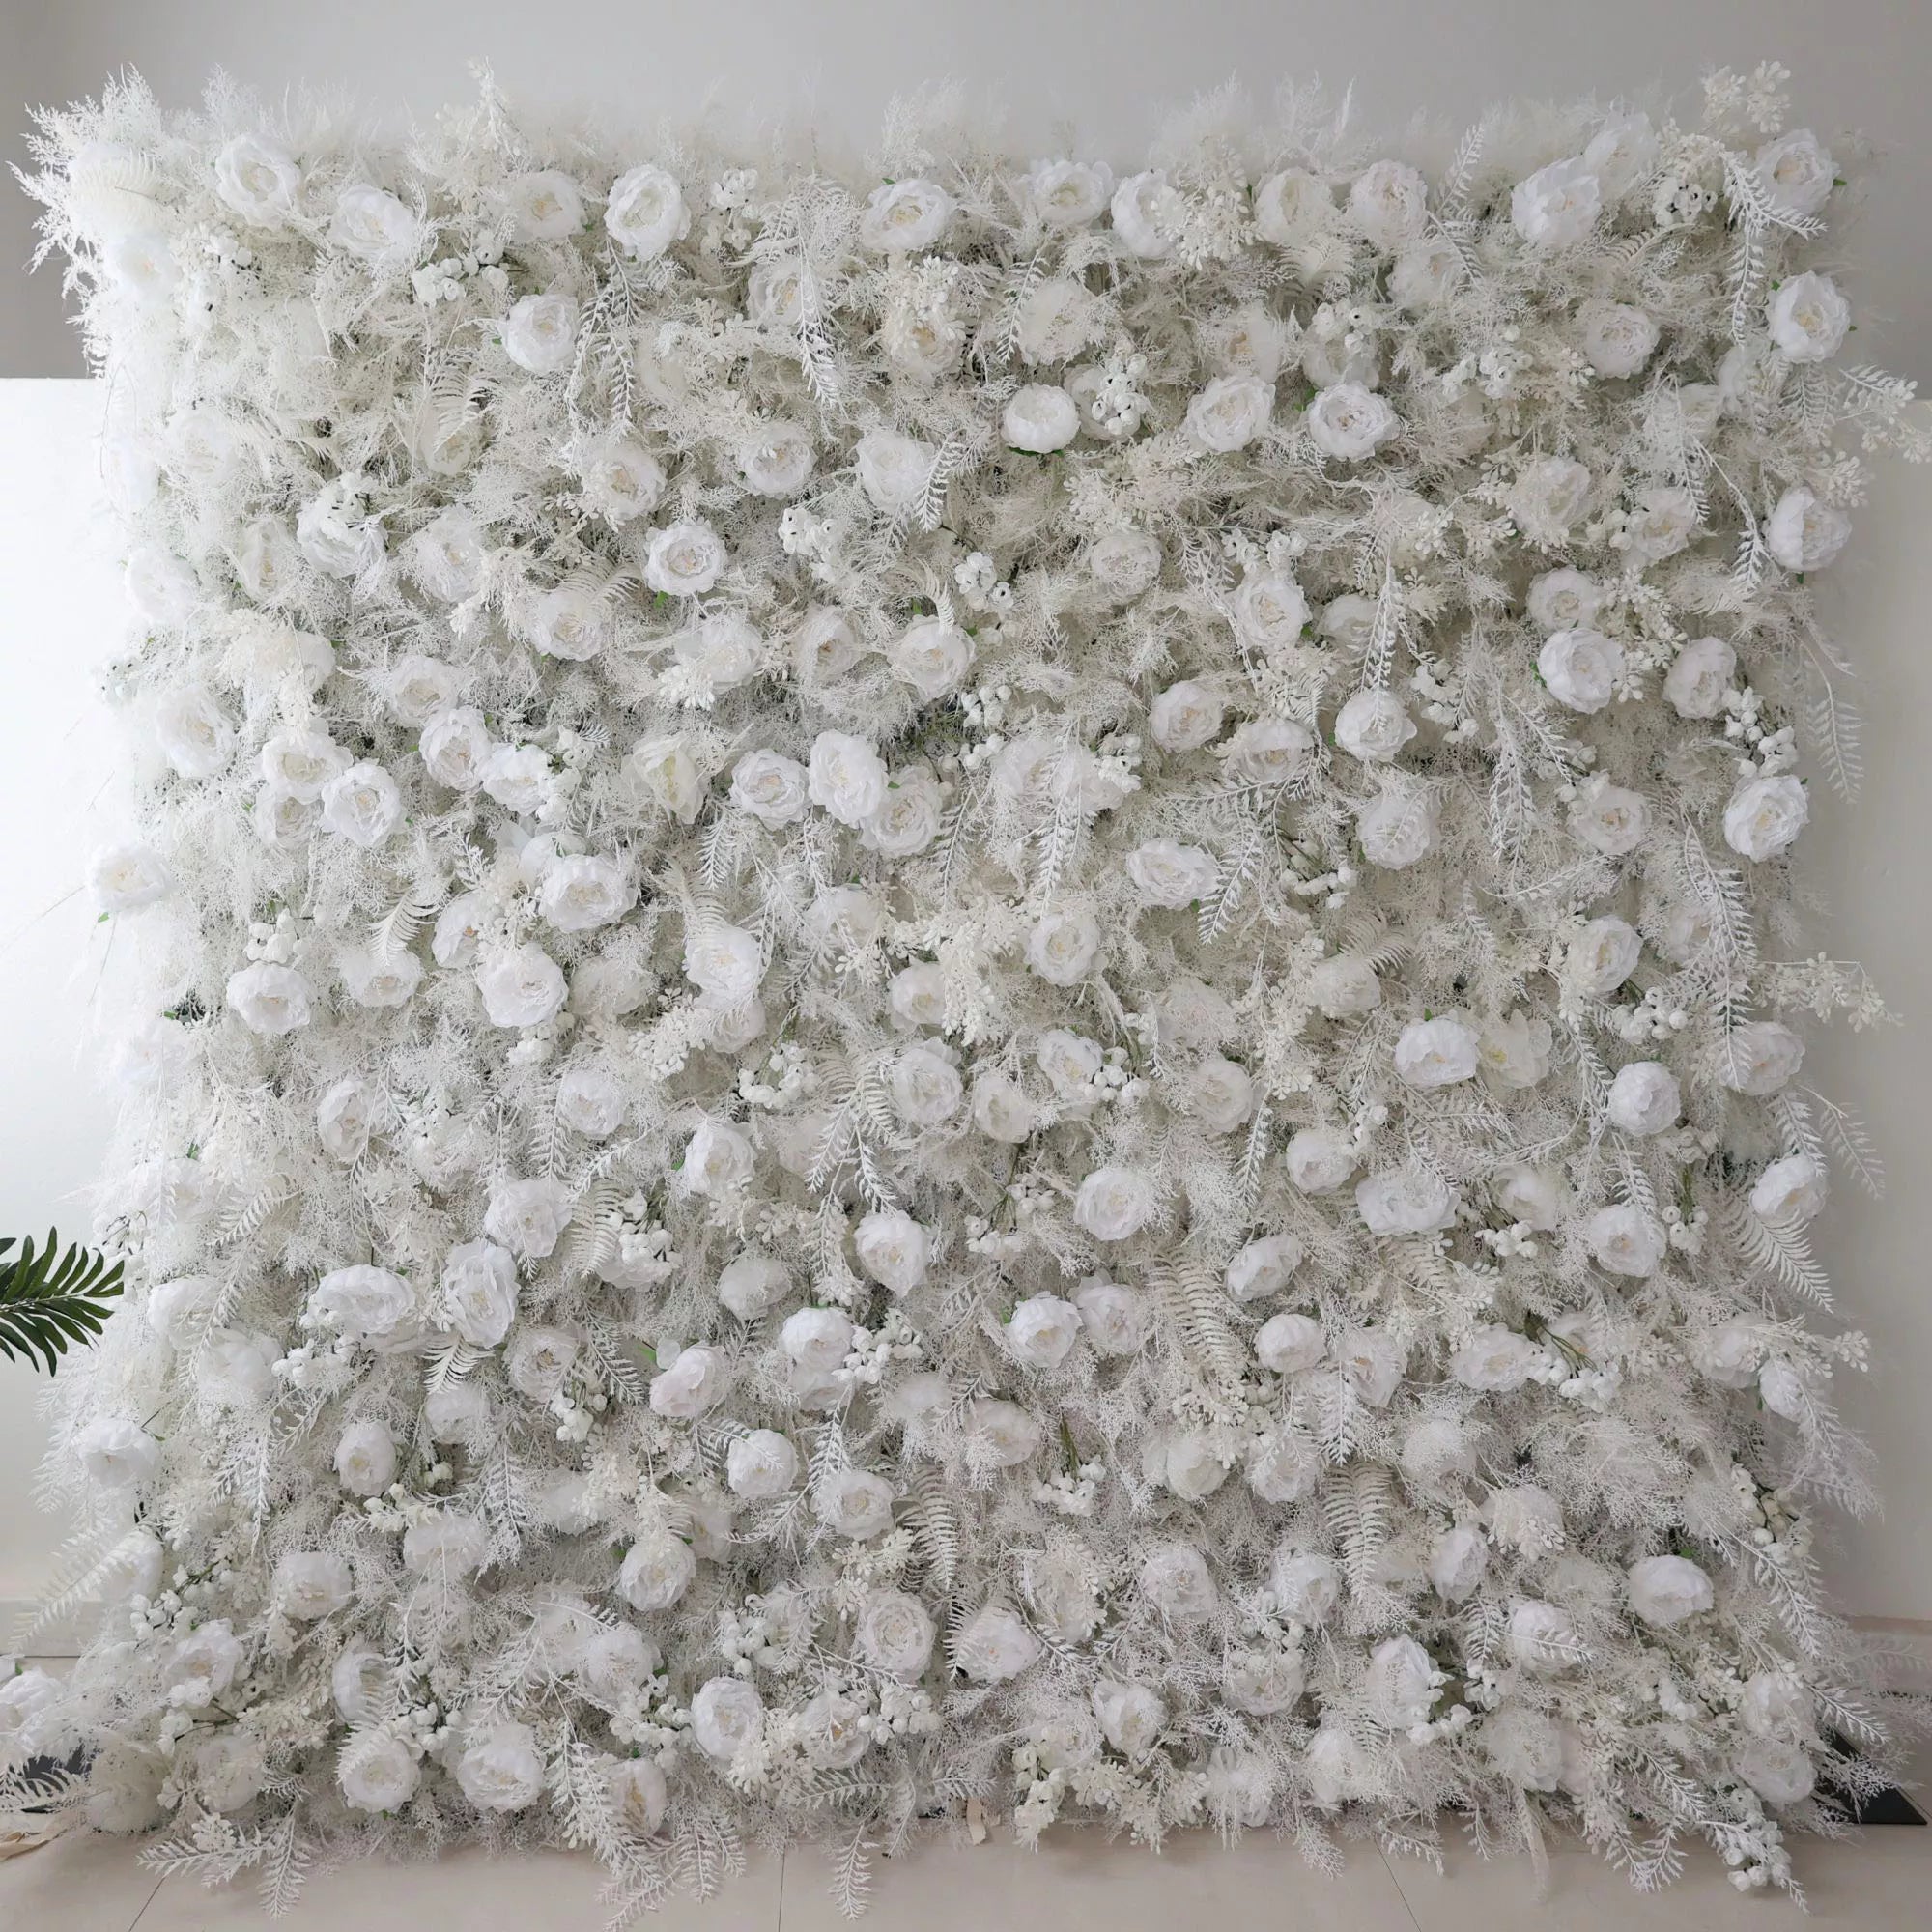 Valar Flowers Snowy White Floral Wall with Frosty Fern Accents: Capturing Winter's Essence for Luxe EventsVF-202